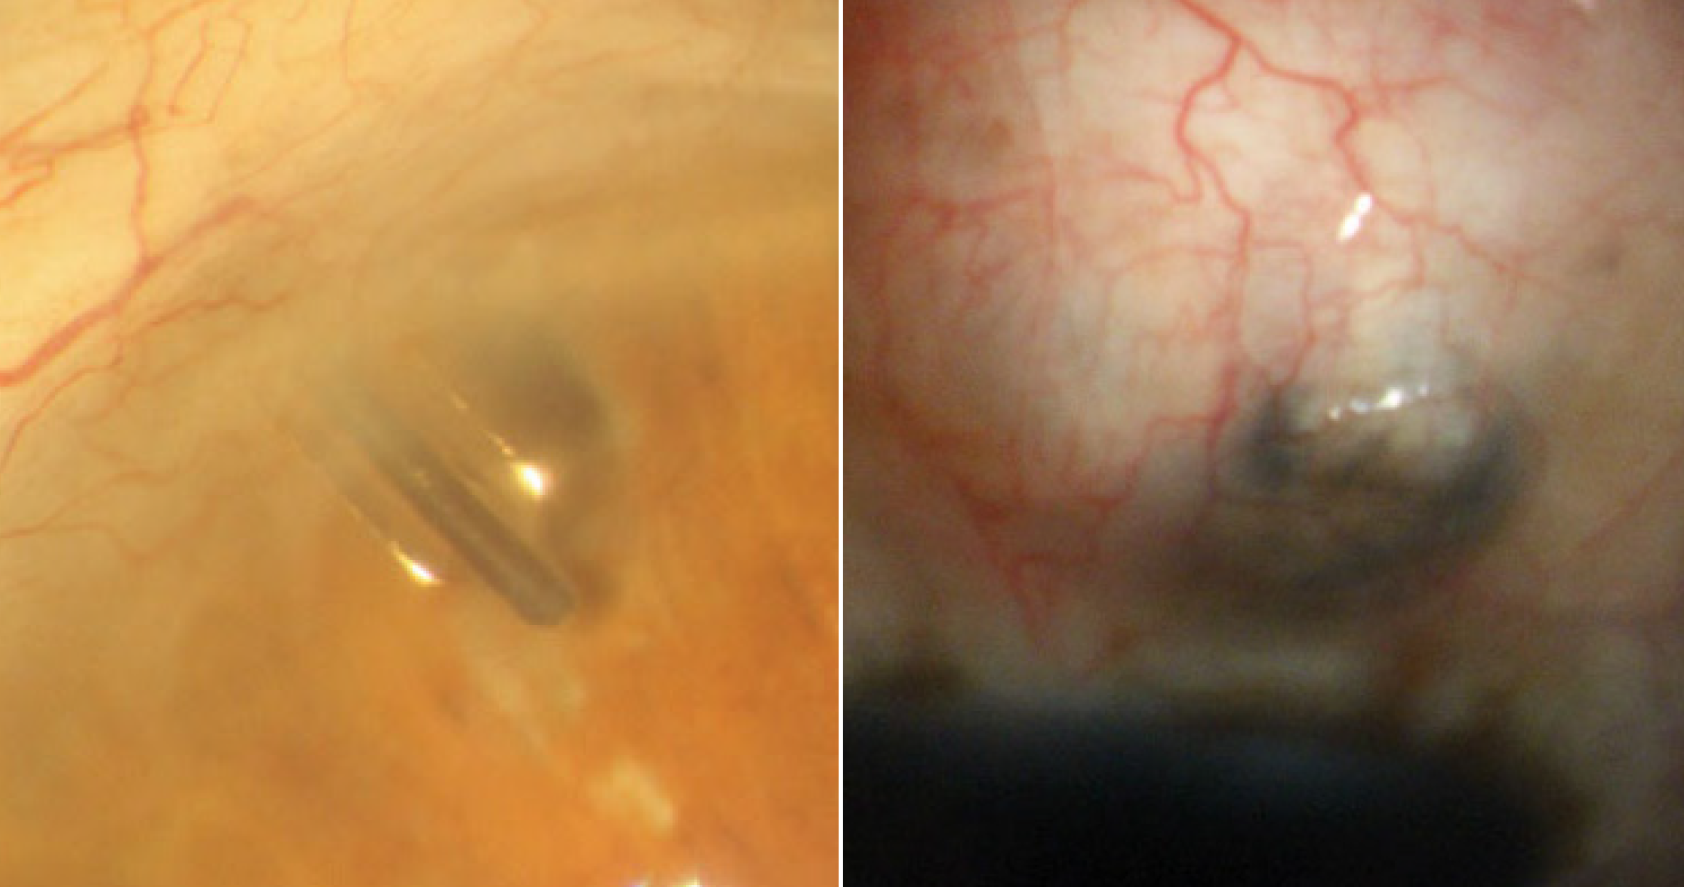 Tube shunt implantation and trabeculectomy are both viable options for surgical treatment of glaucoma.